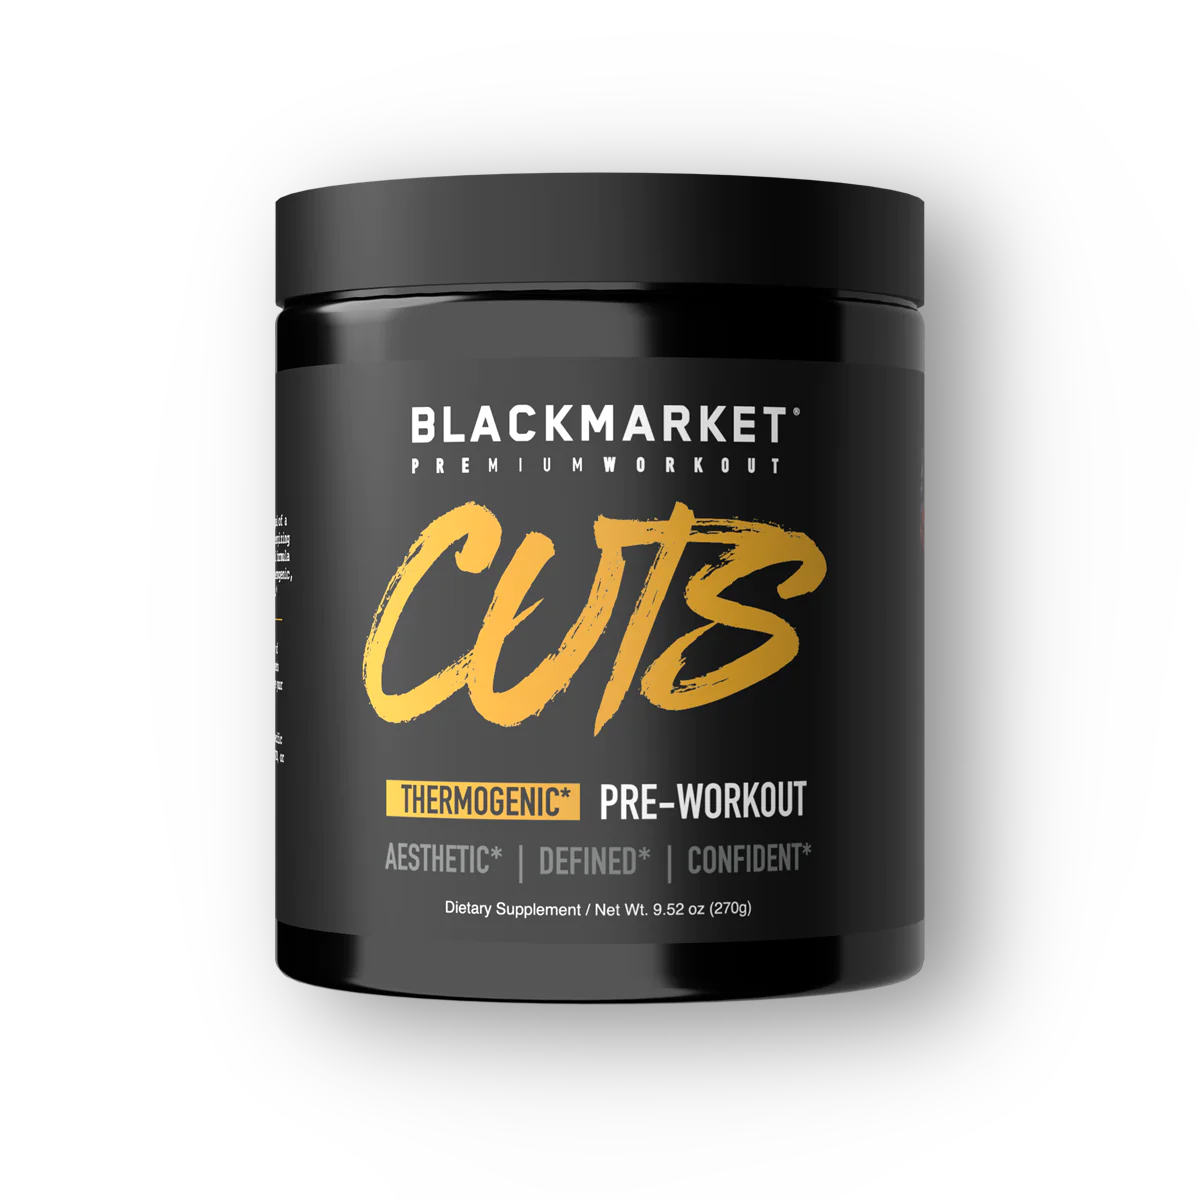 Cuts Pre-Workout by Blackmarket Labs